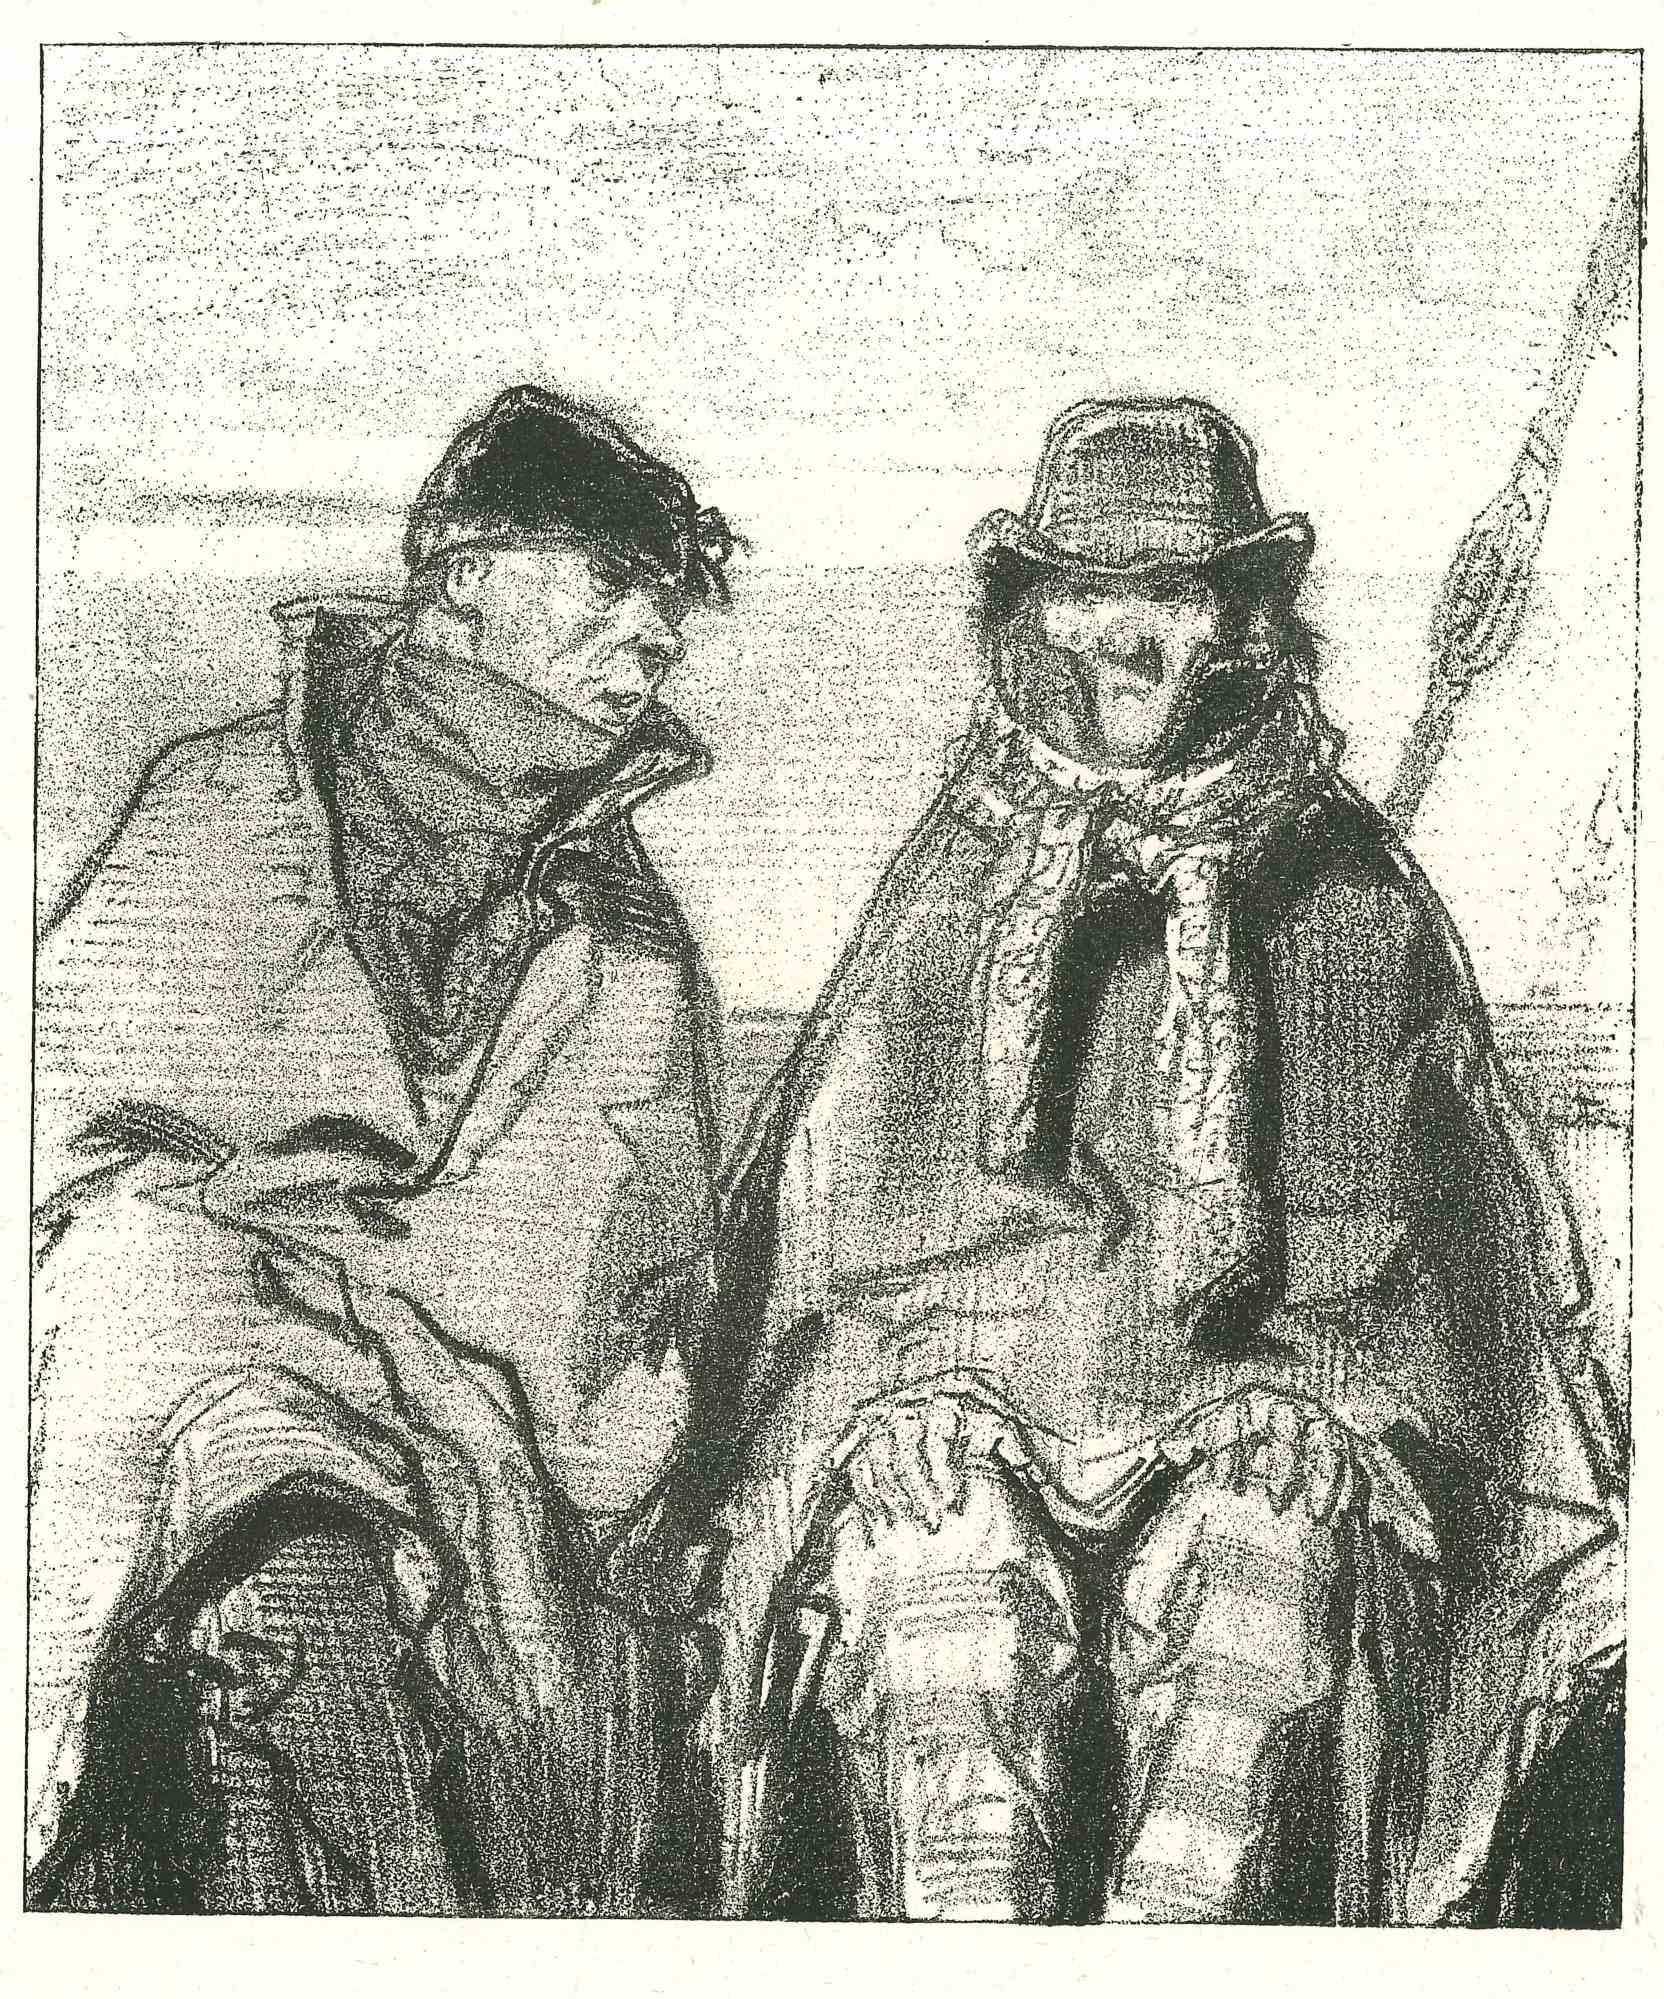 The conversation in the ship is an original lithograph artwork on ivory-colored paper, realized by the French draftsman Paul Gavarni (after) (alias Guillaume Sulpice Chevalier Gavarni, 1804-1866) in Paris, 1881, in the collection of Illustrations